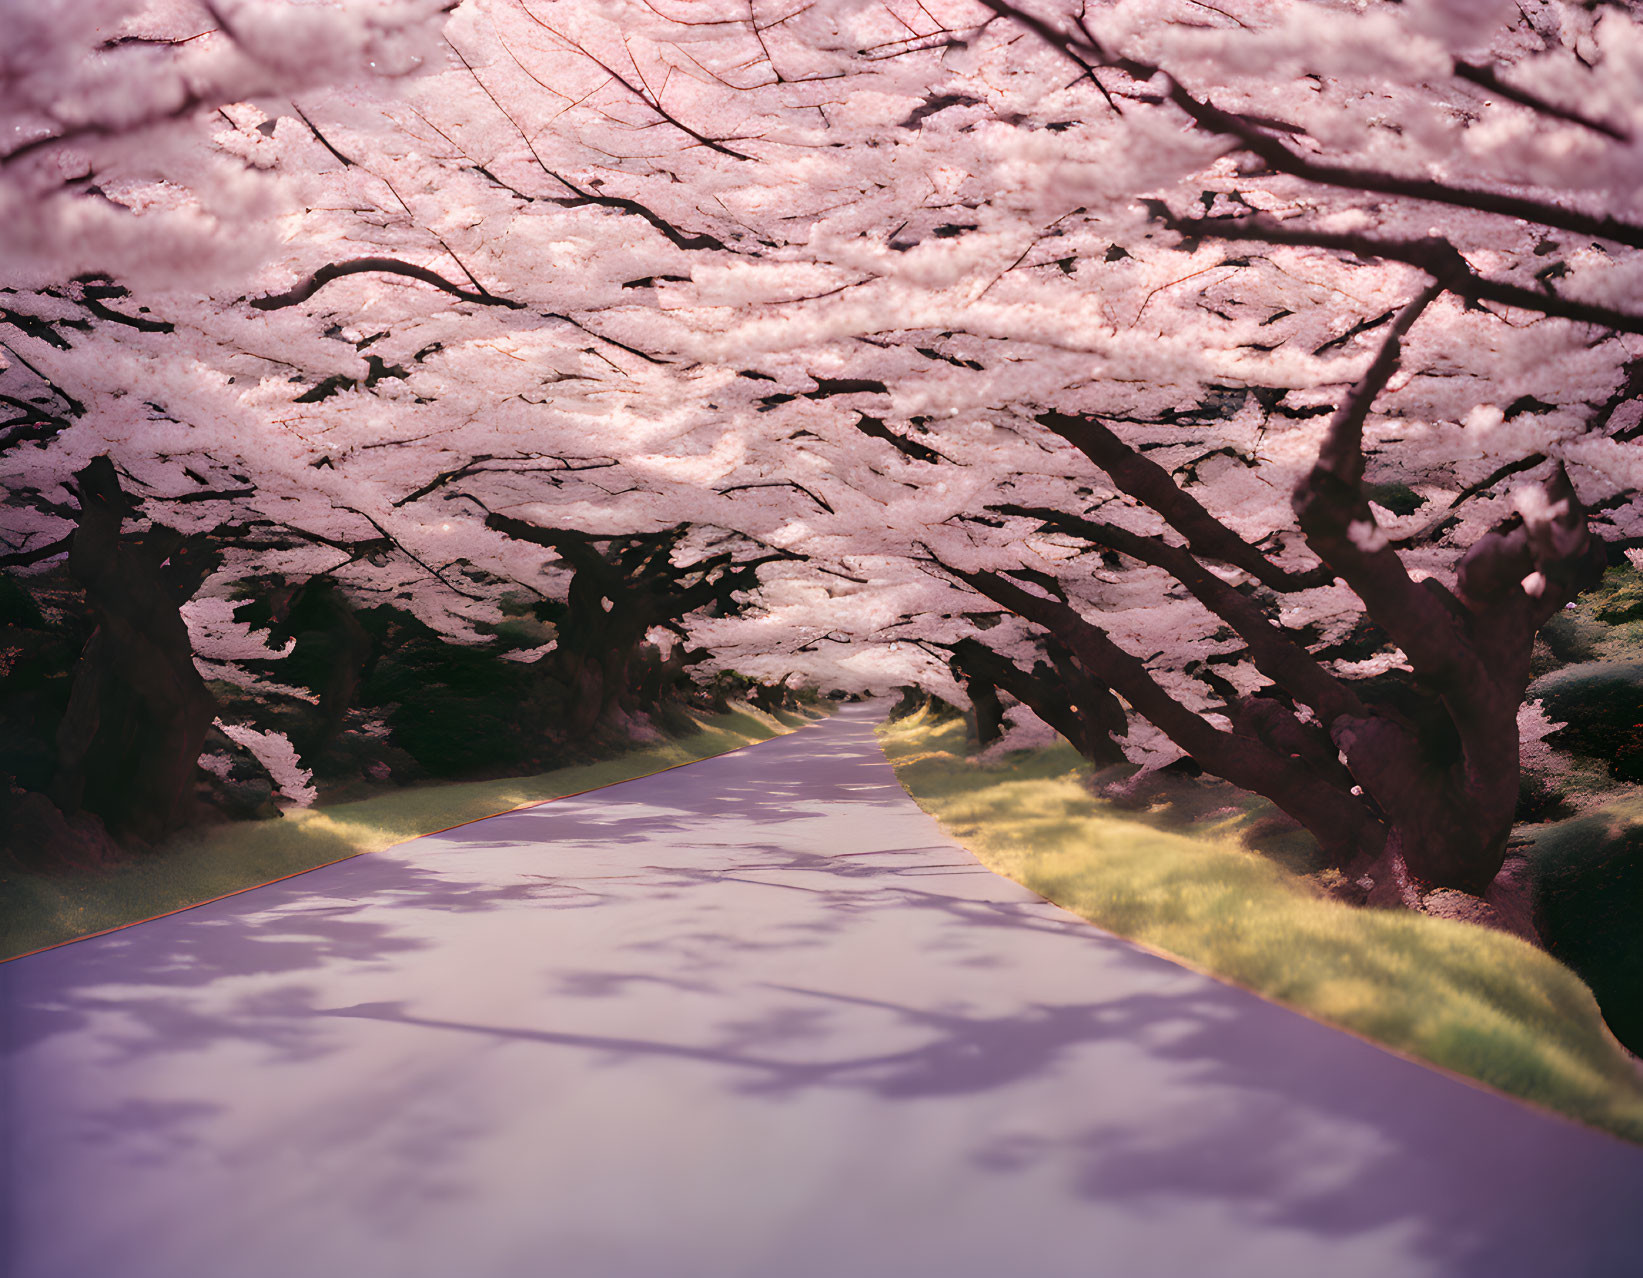 Tranquil Pathway Under Blooming Cherry Blossoms